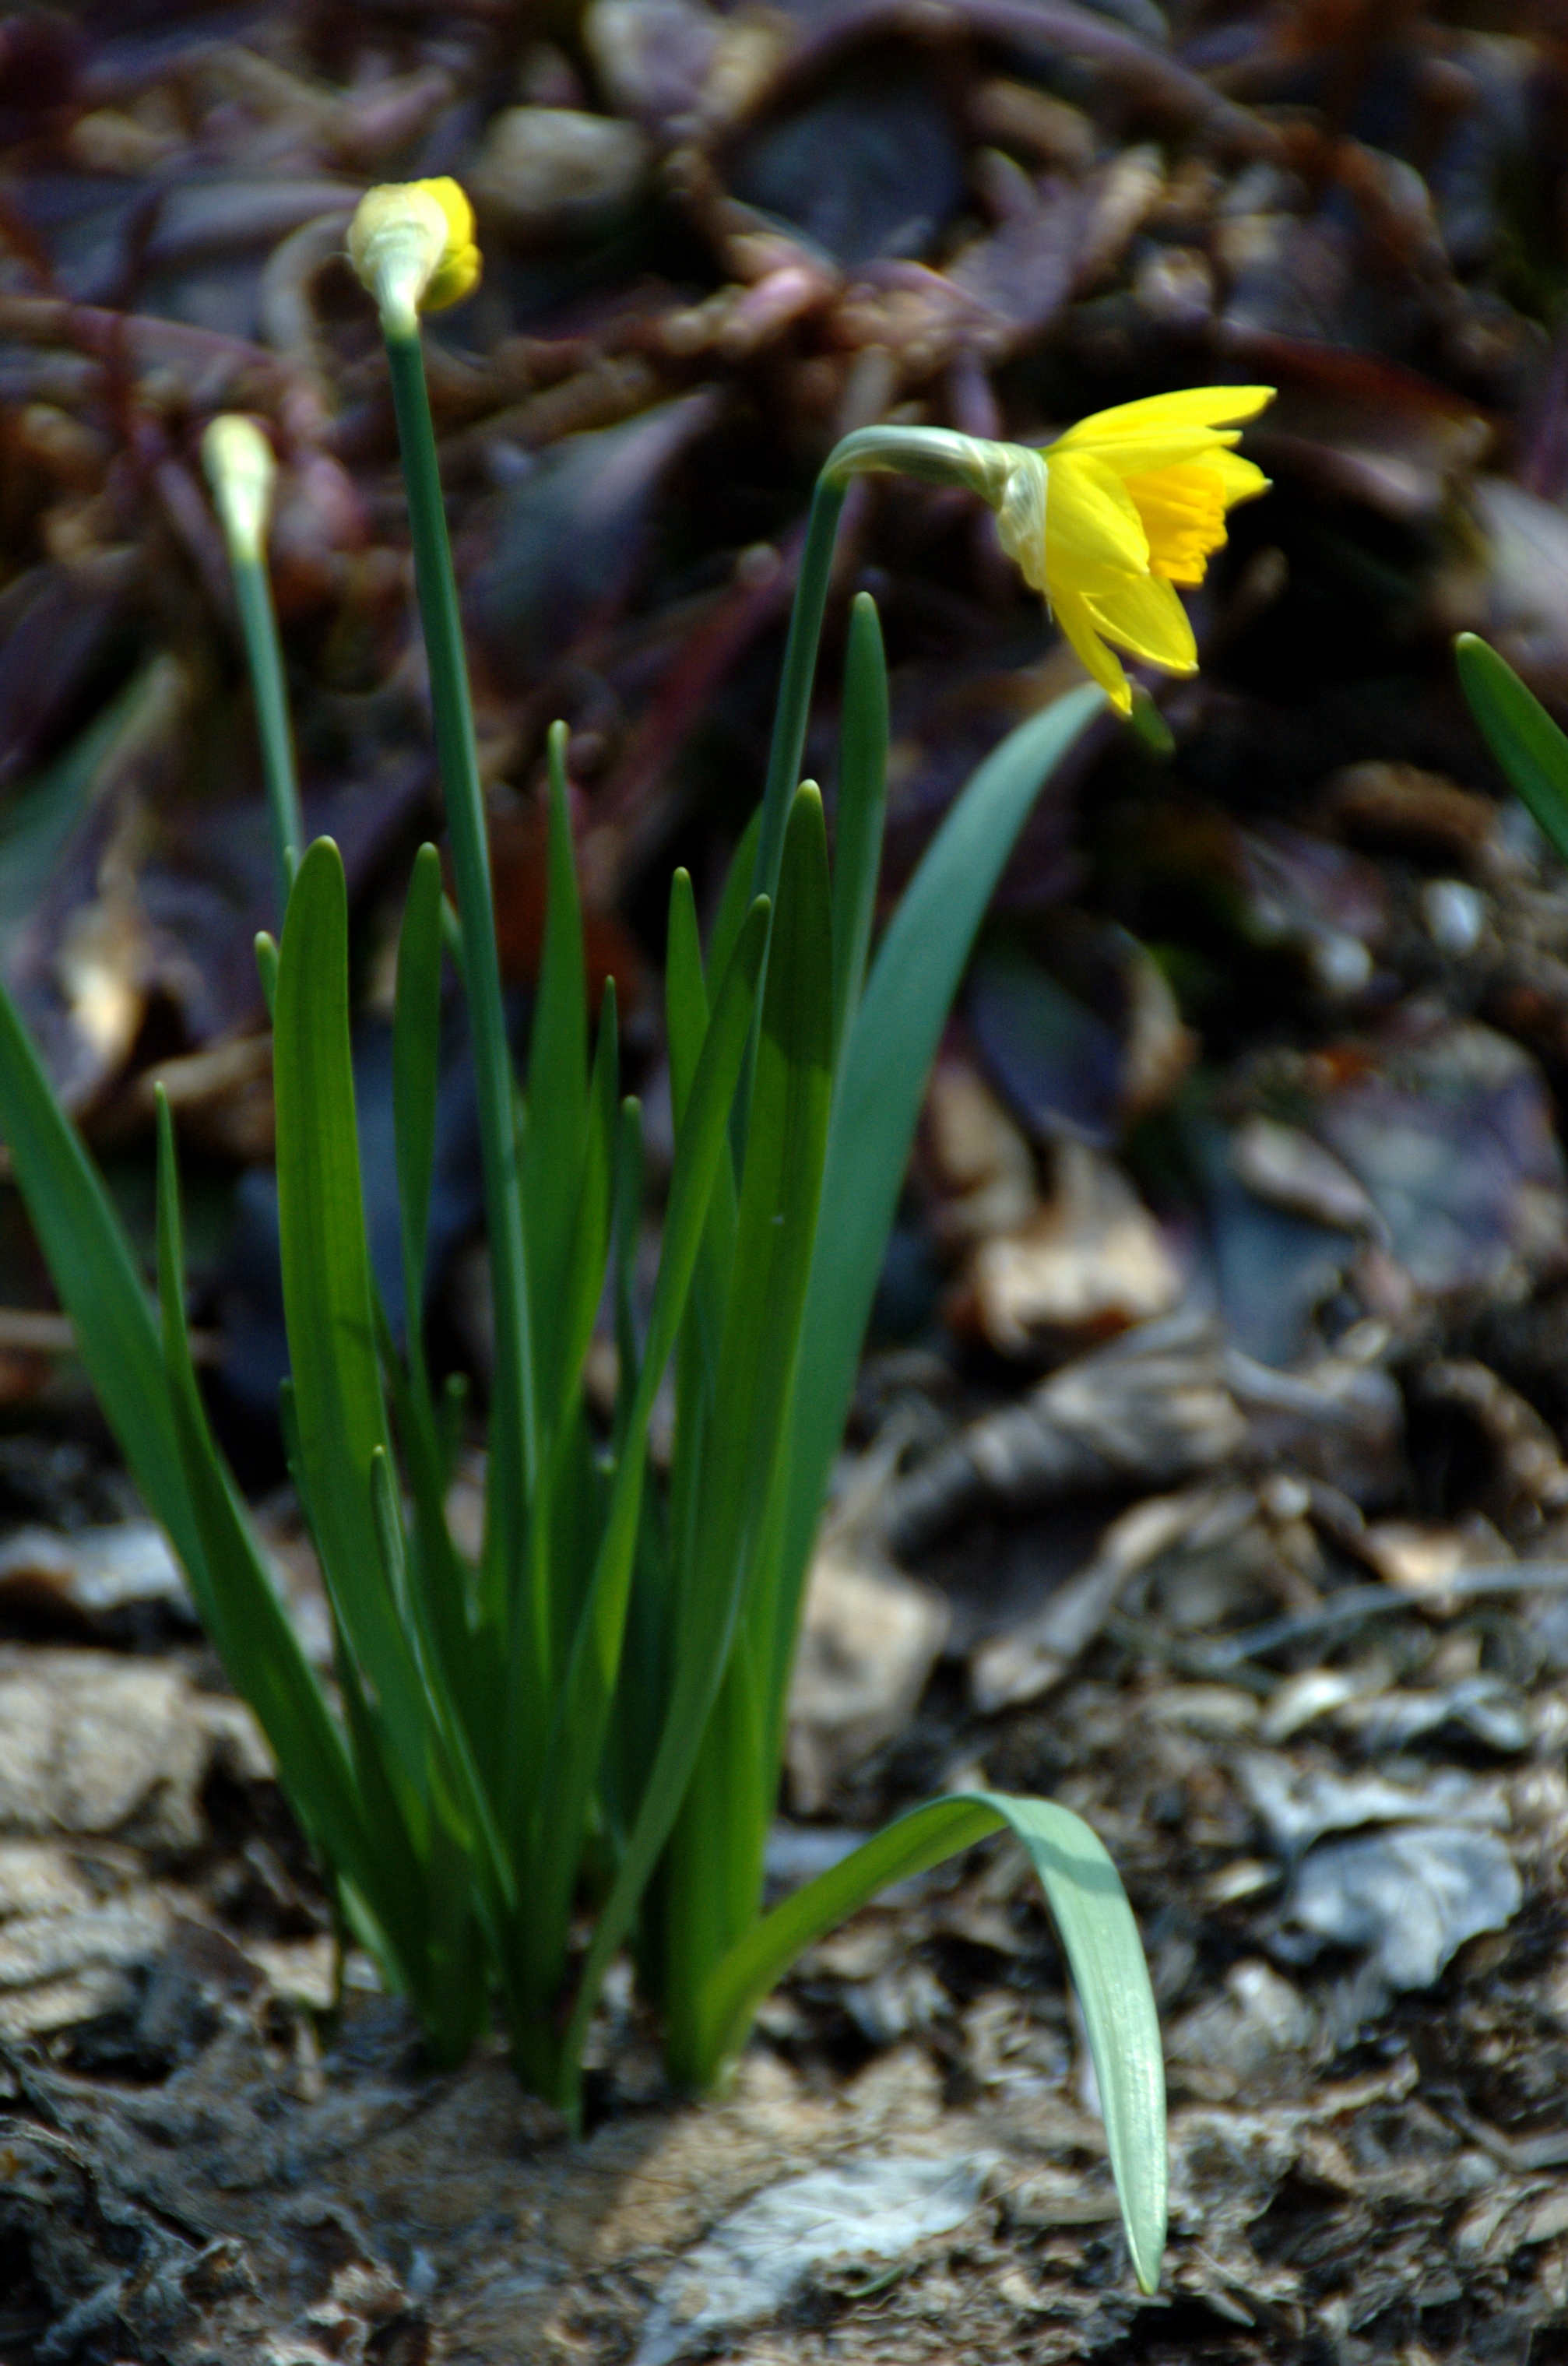 Our First Daffodil Bloom